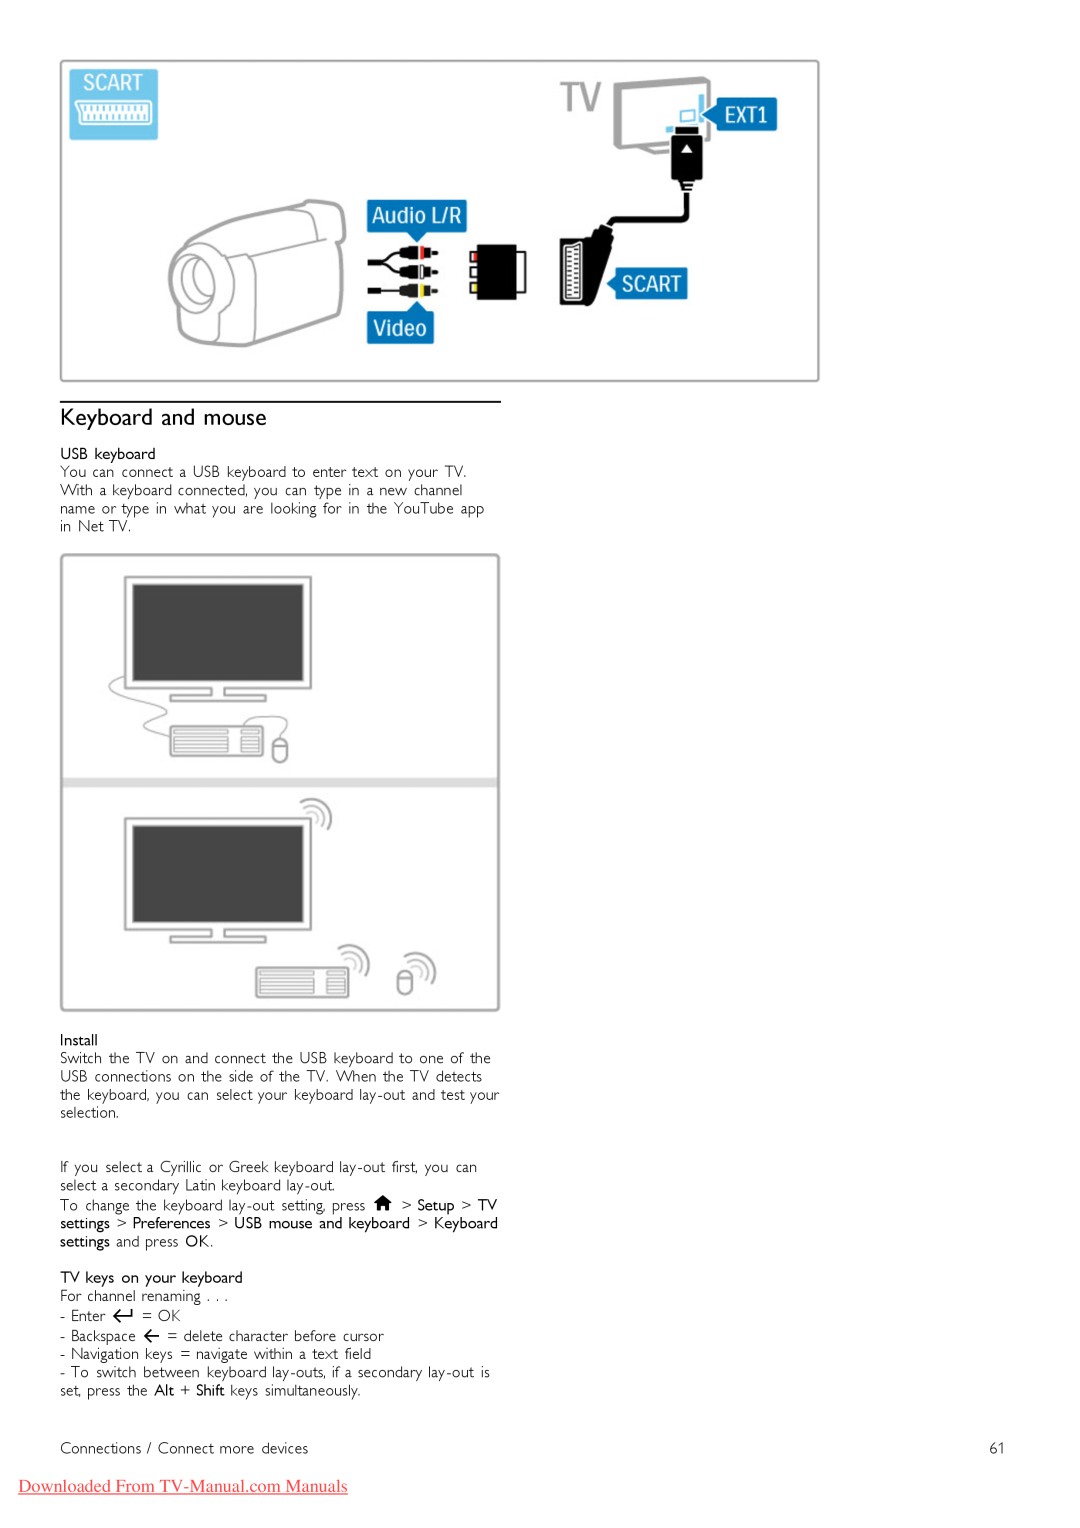 Philips 32PFL9606, 37PFL9606, 52PFL9606, 46PFL9706 manual Keyboard and mouse, Downloaded From TV-Manual.com Manuals 